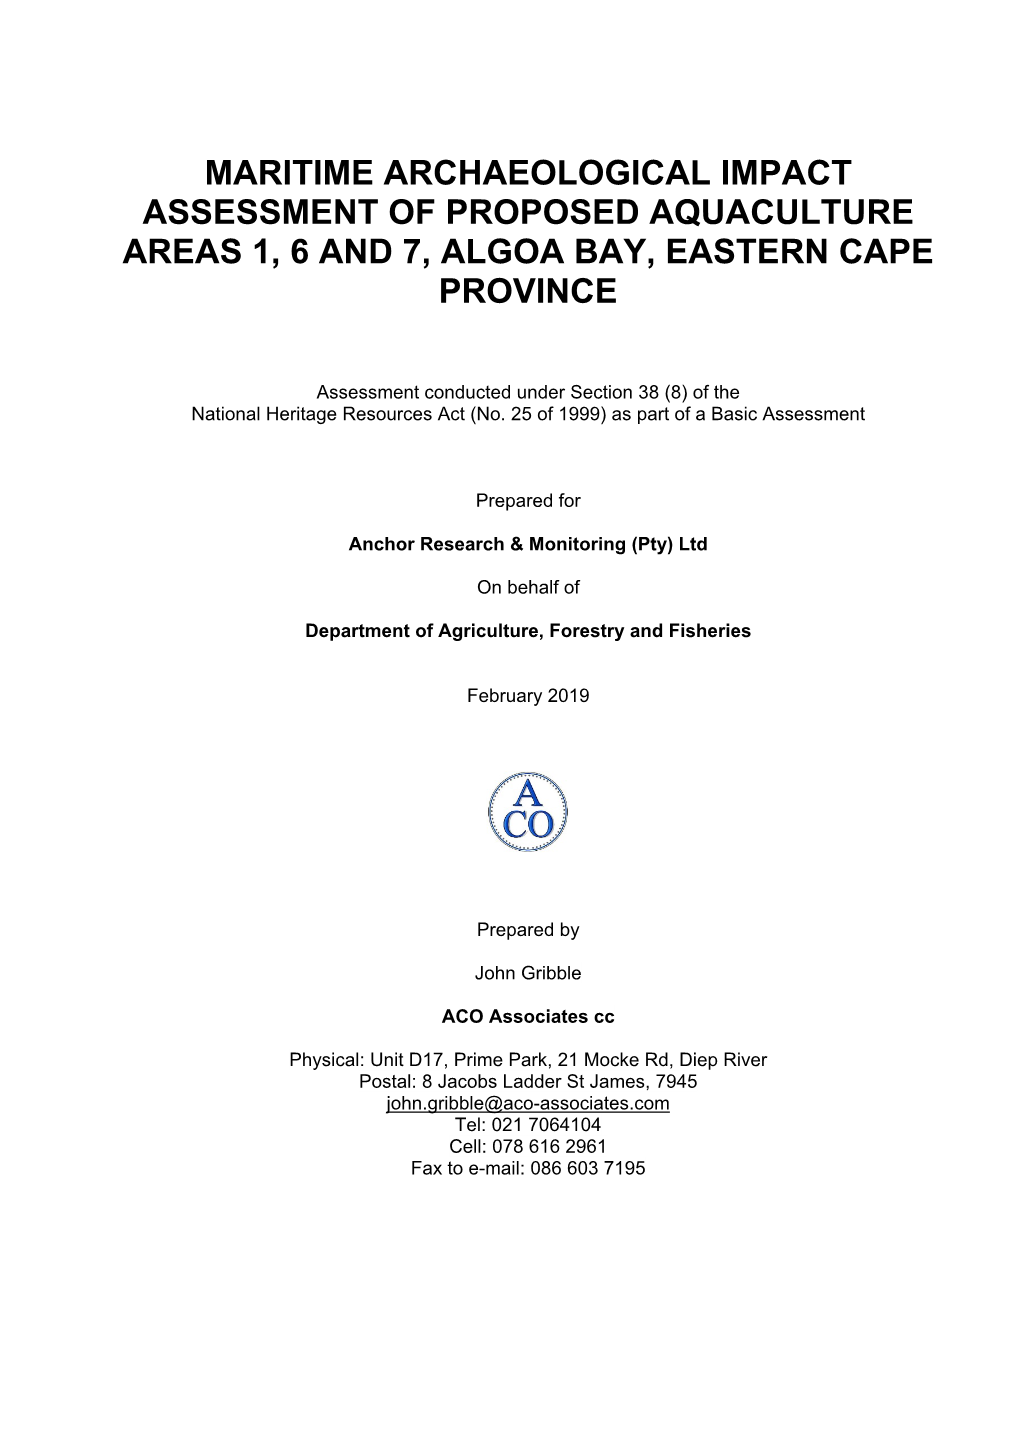 Maritime Archaeological Impact Assessment of Proposed Aquaculture Areas 1, 6 and 7, Algoa Bay, Eastern Cape Province